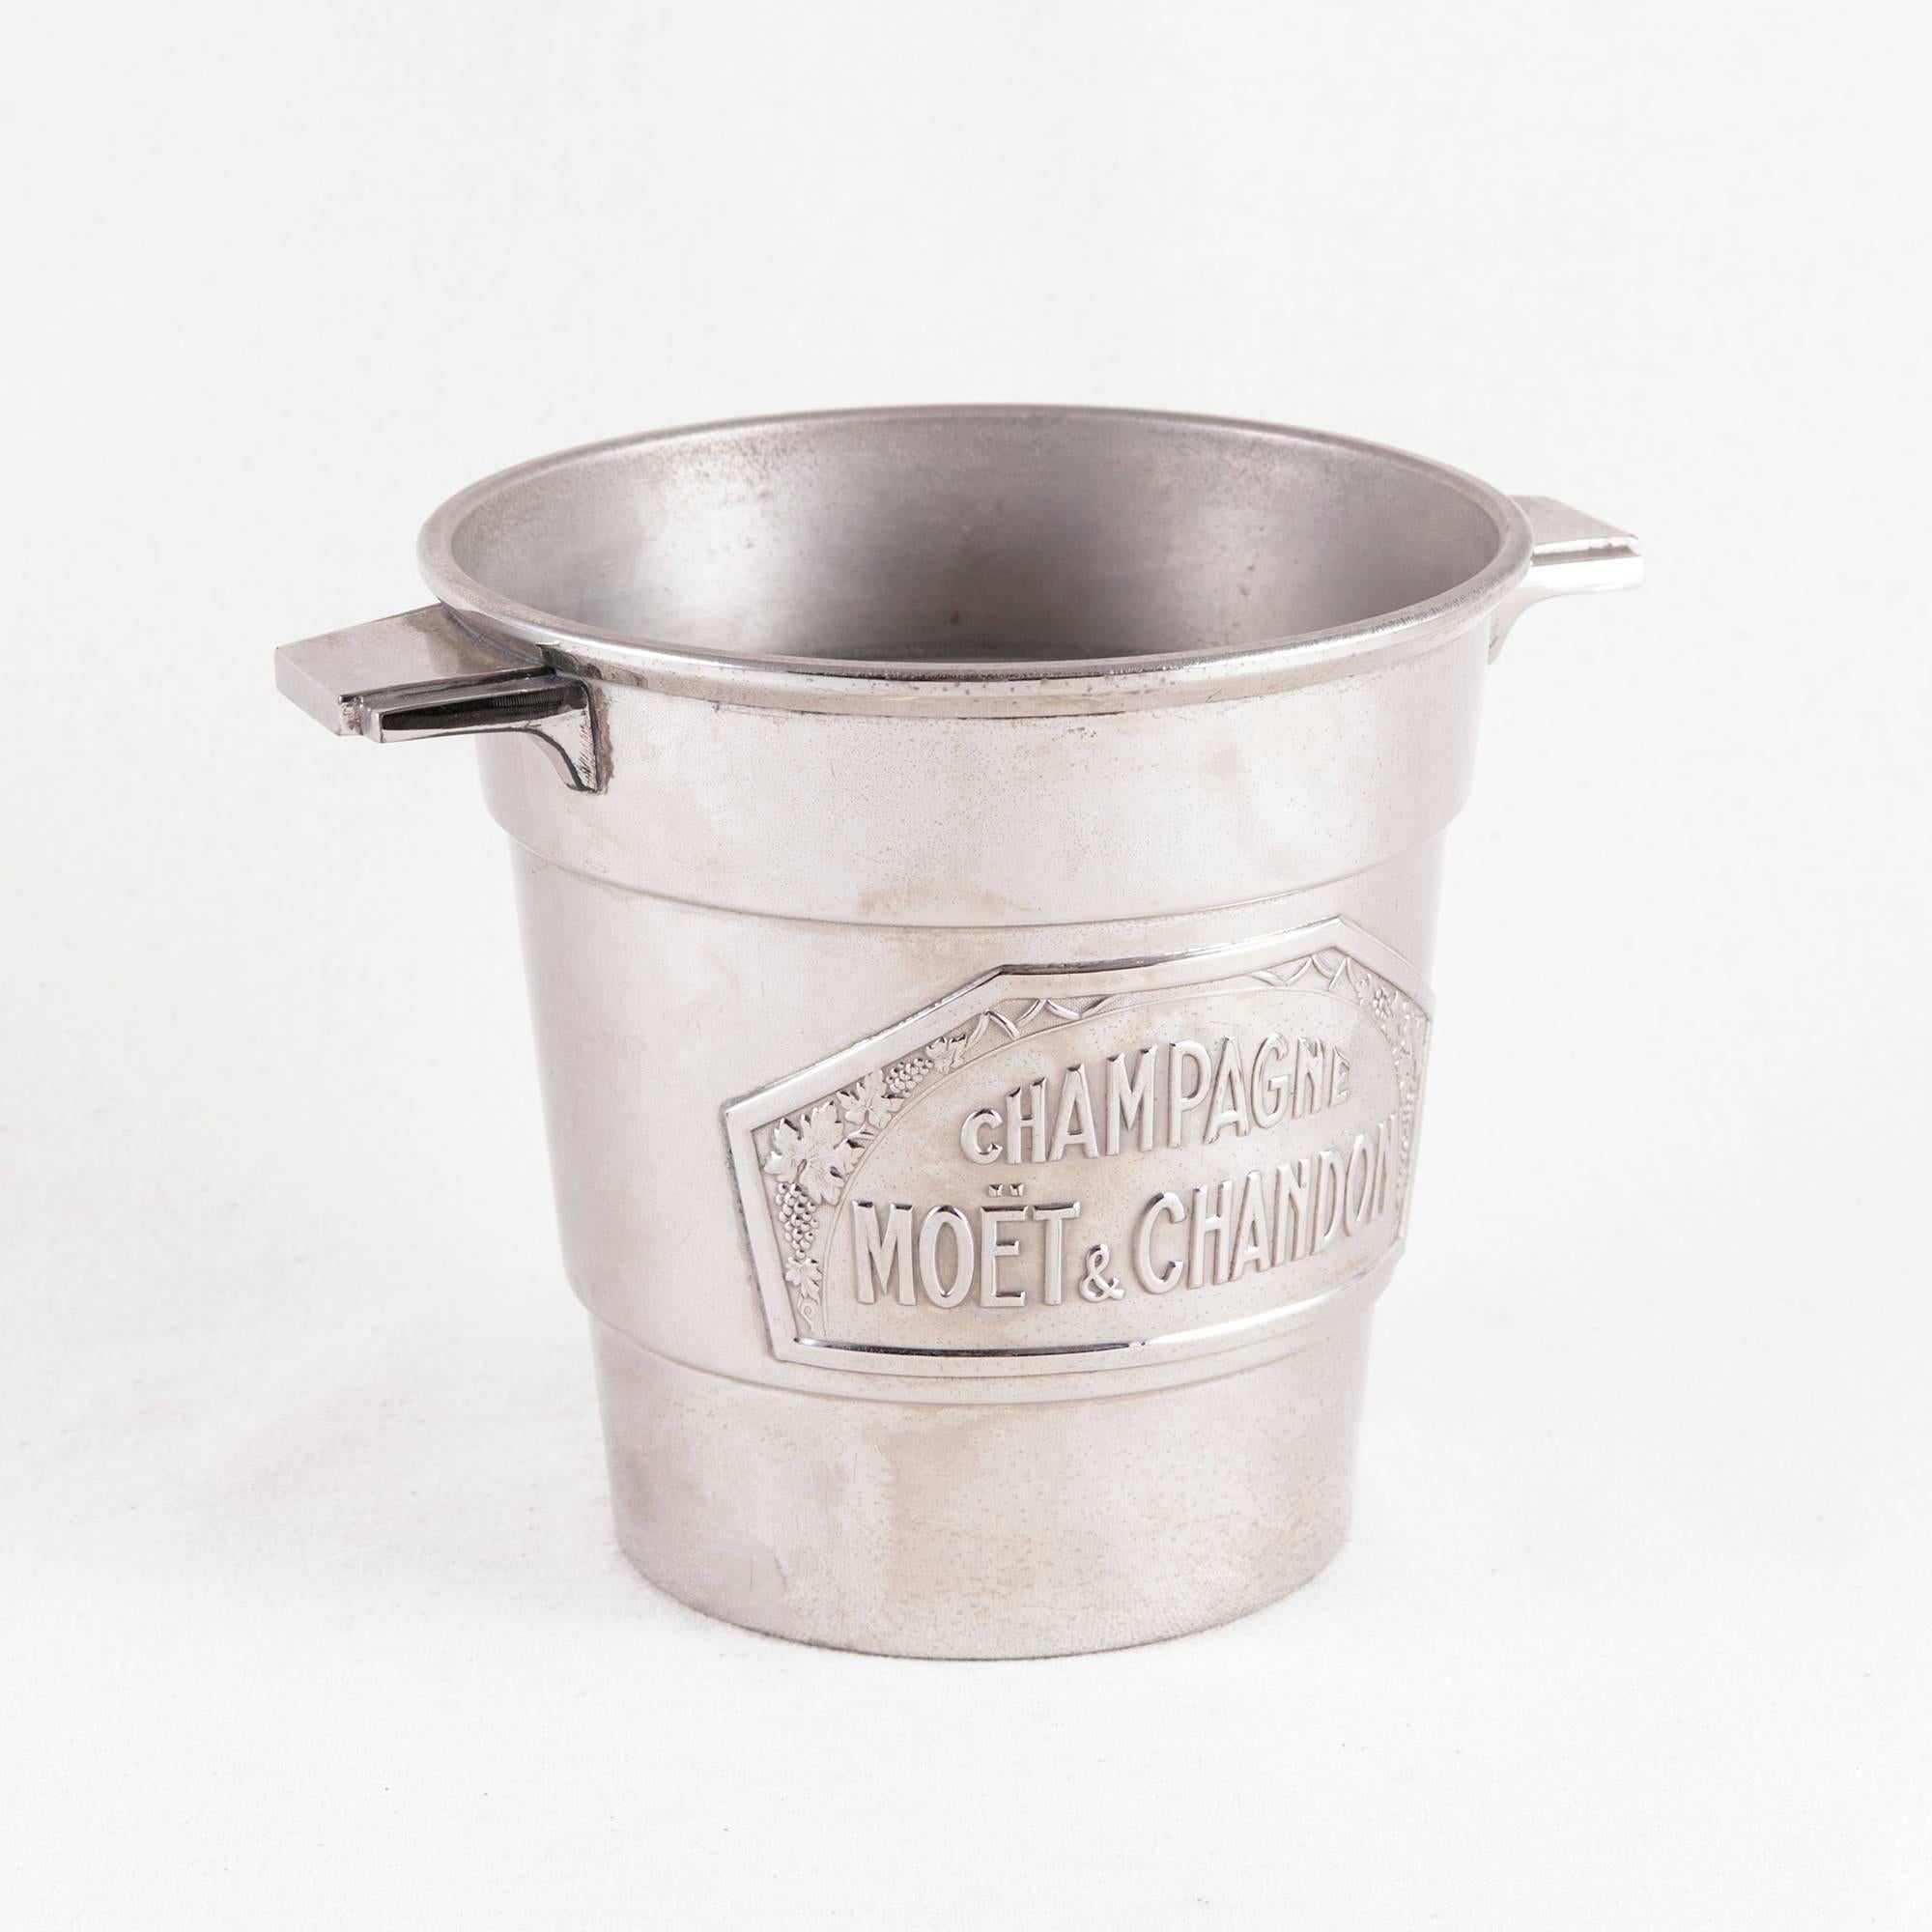 This small-scale Art Deco period silver plate champagne bucket features a label of the name of the renowned champagne producer, Moet et Chandon, flanked by grapes and grape leaves. With its unusual size intended for half bottles of champagne, this